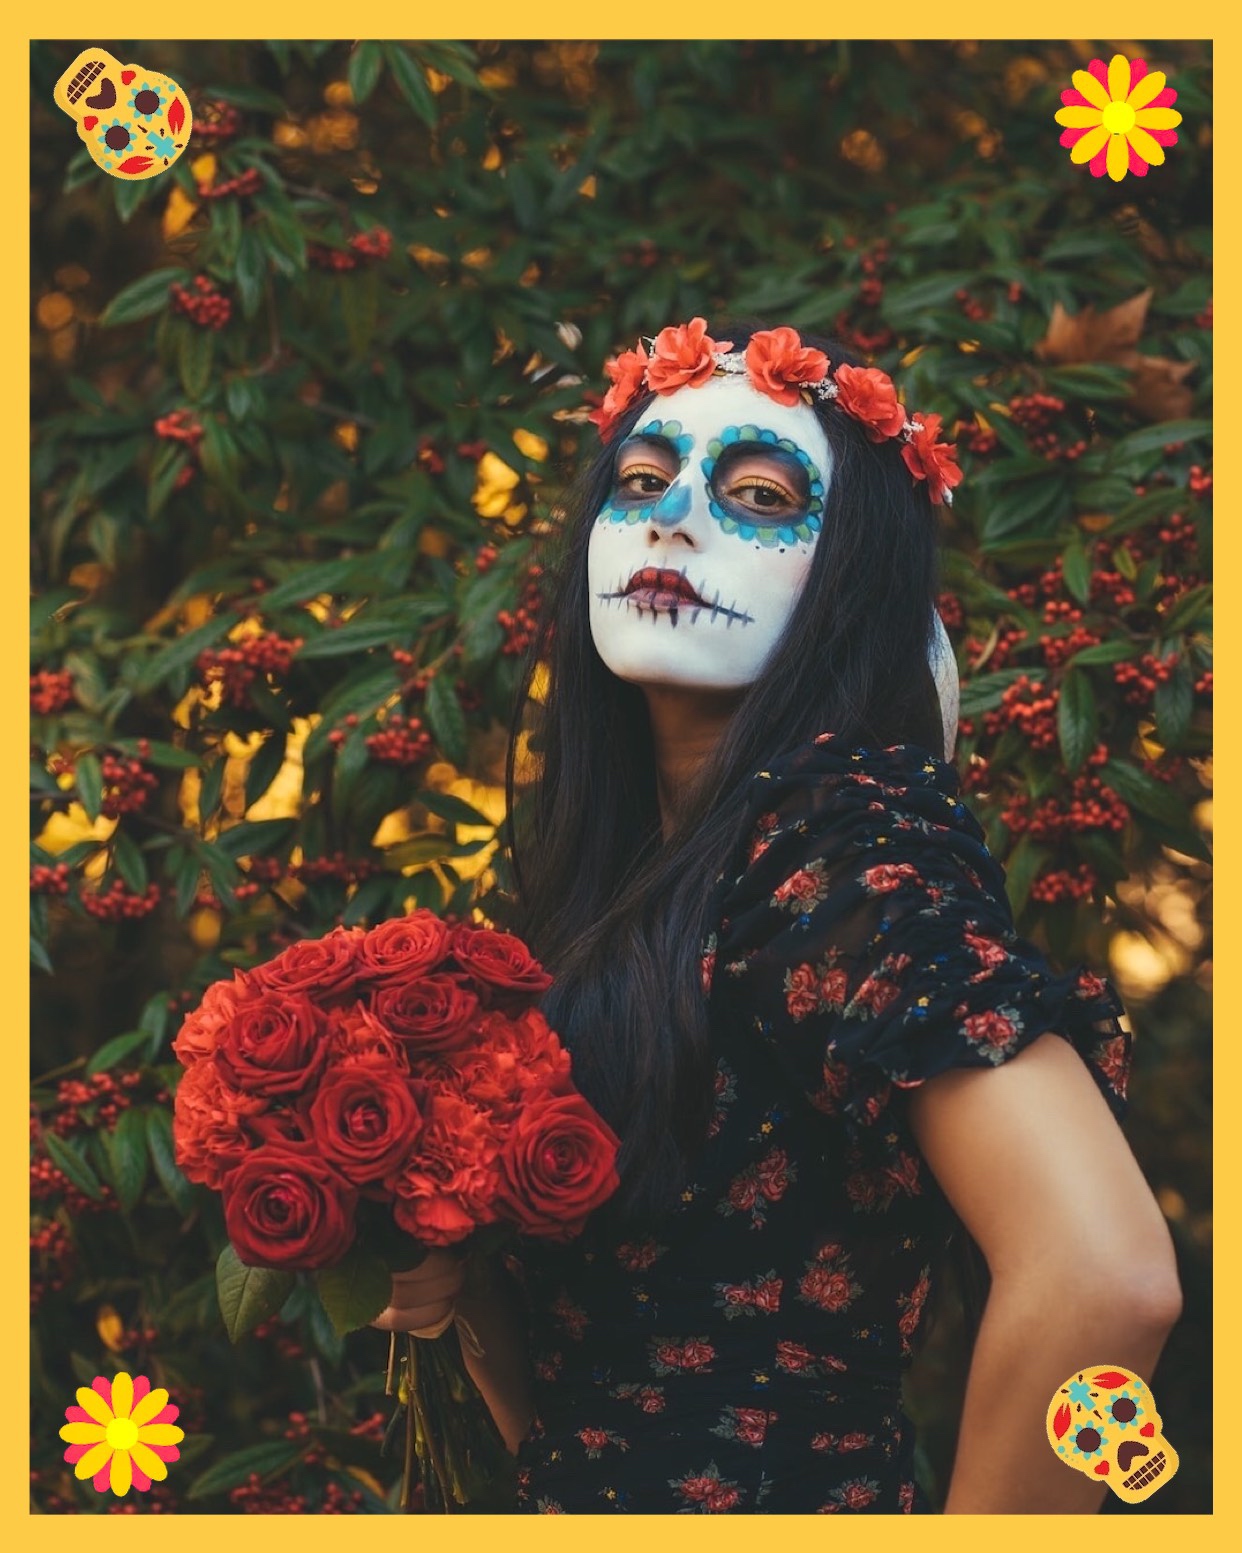 A Woman With Makeup And Flowers In Her Hair Day Of The Dead Template